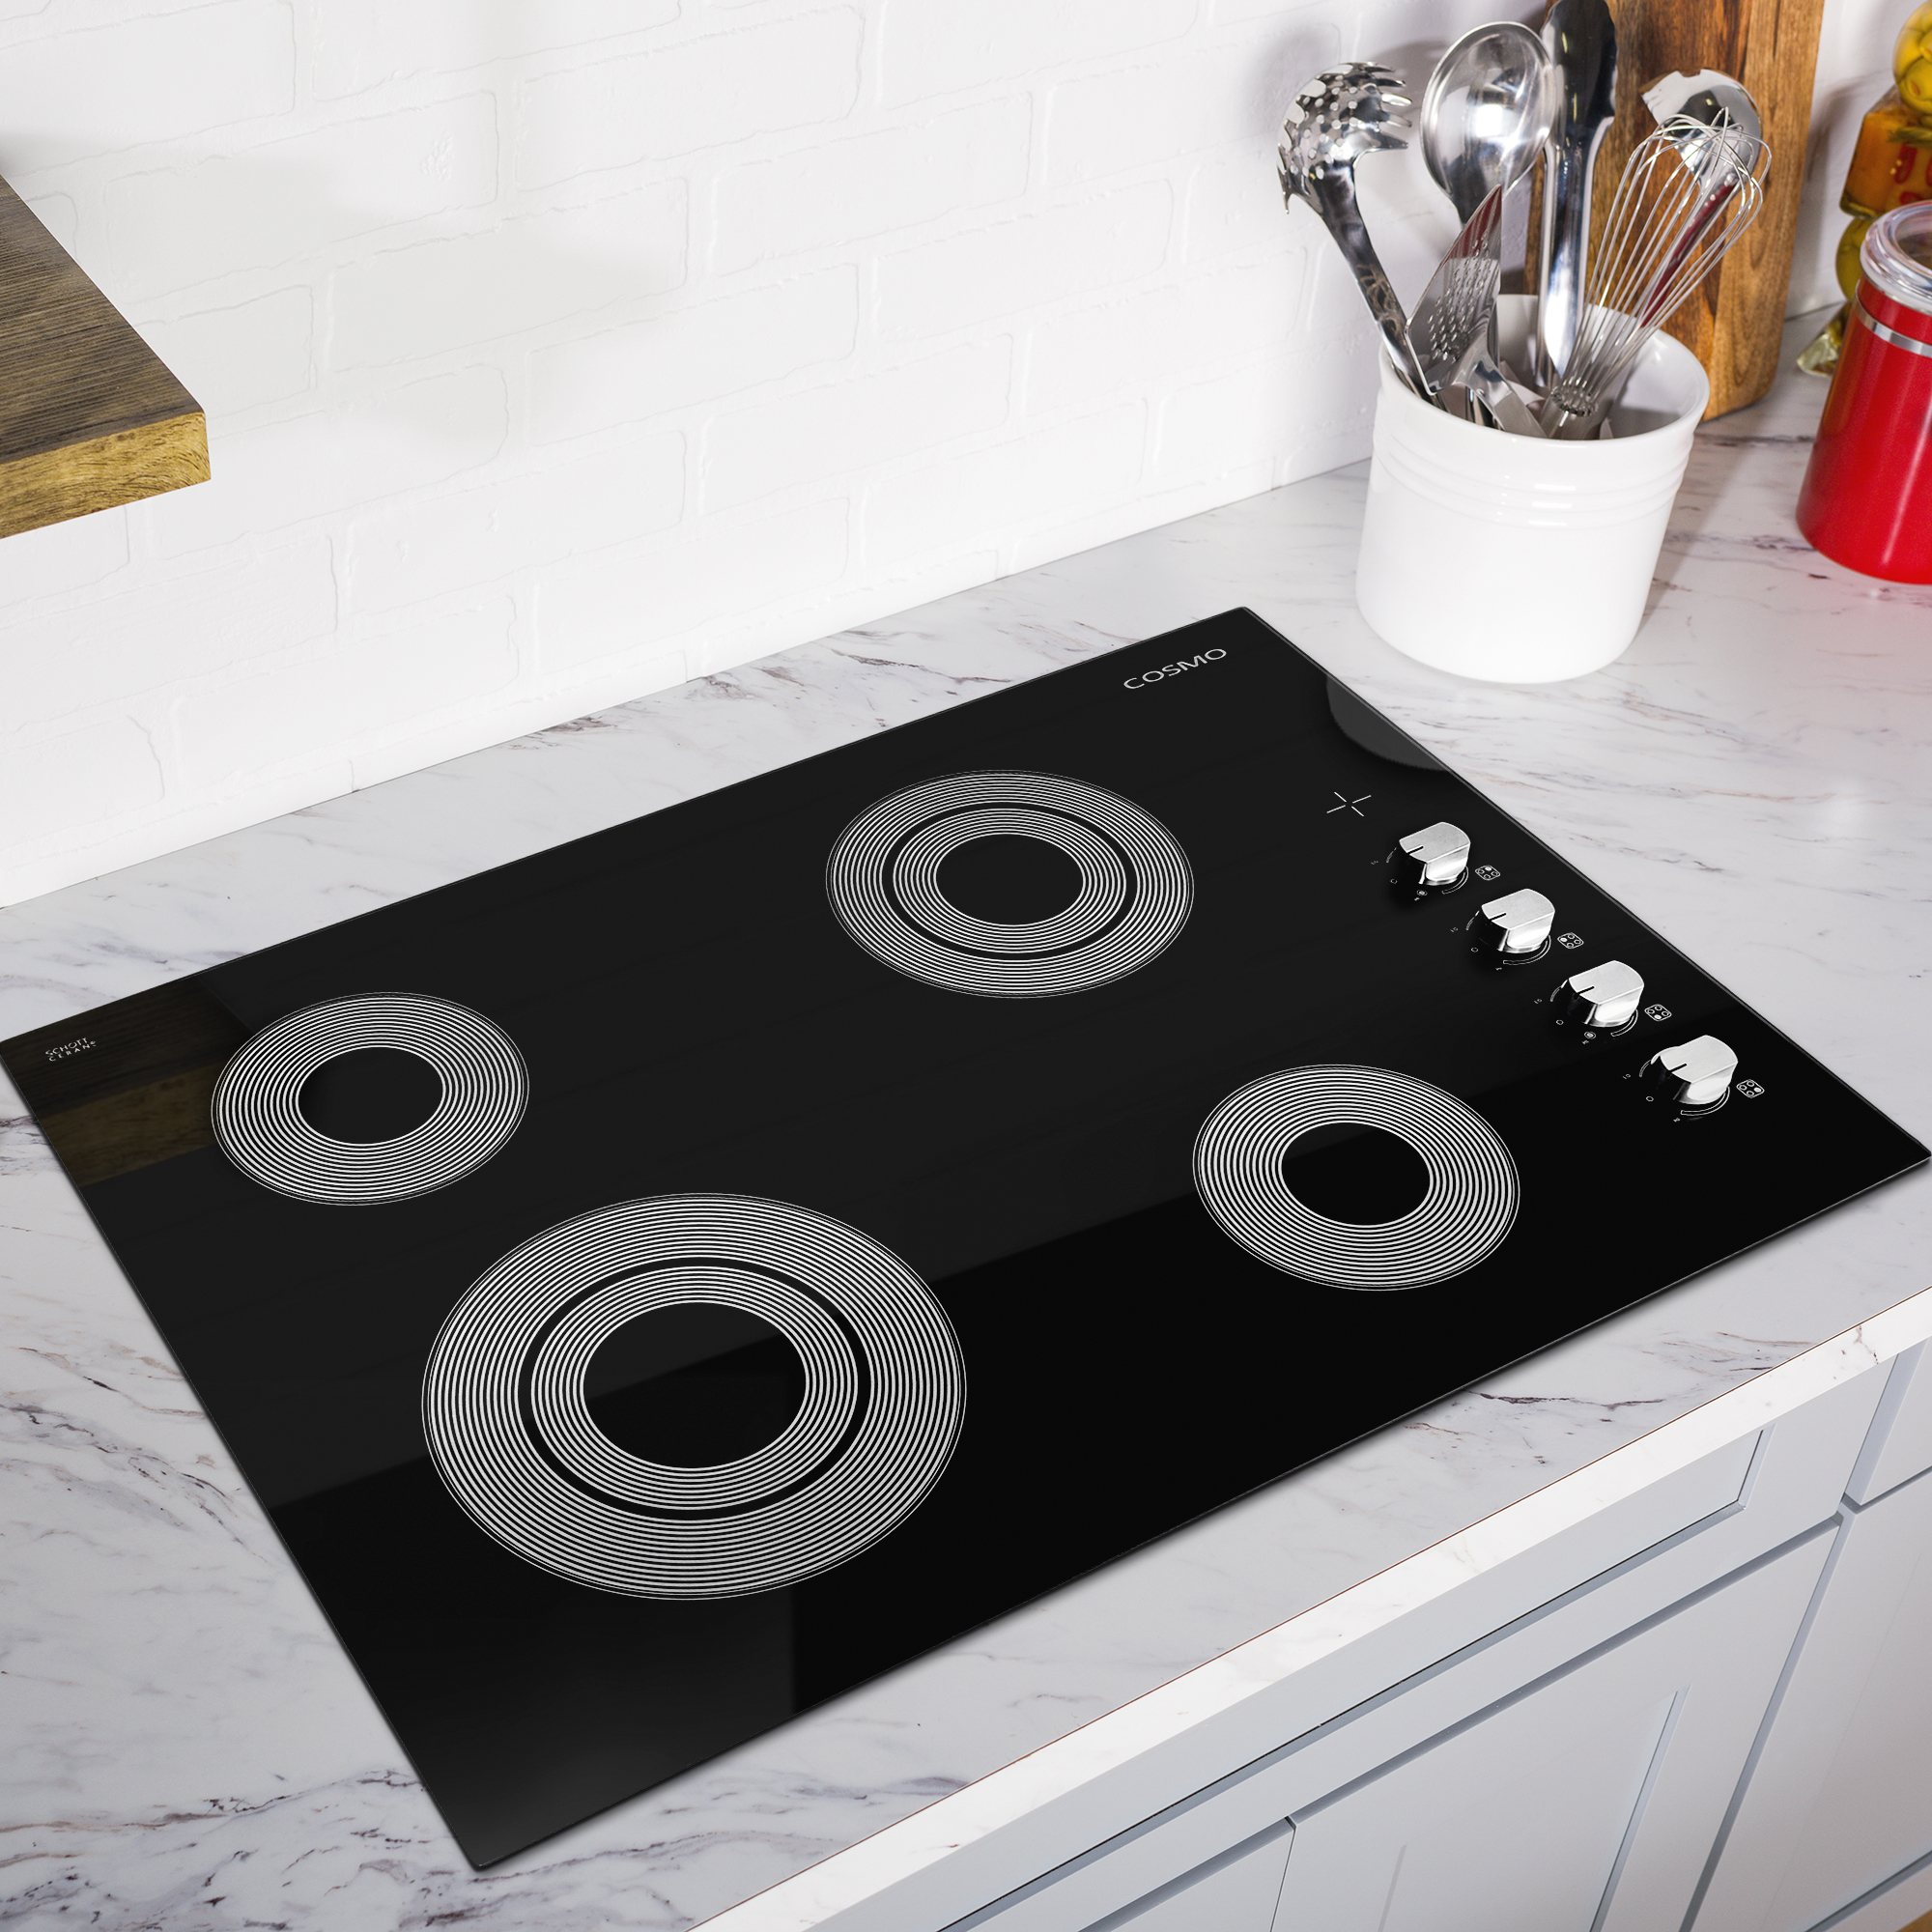 What Not to Do on a Ceramic or Glass Cooktop